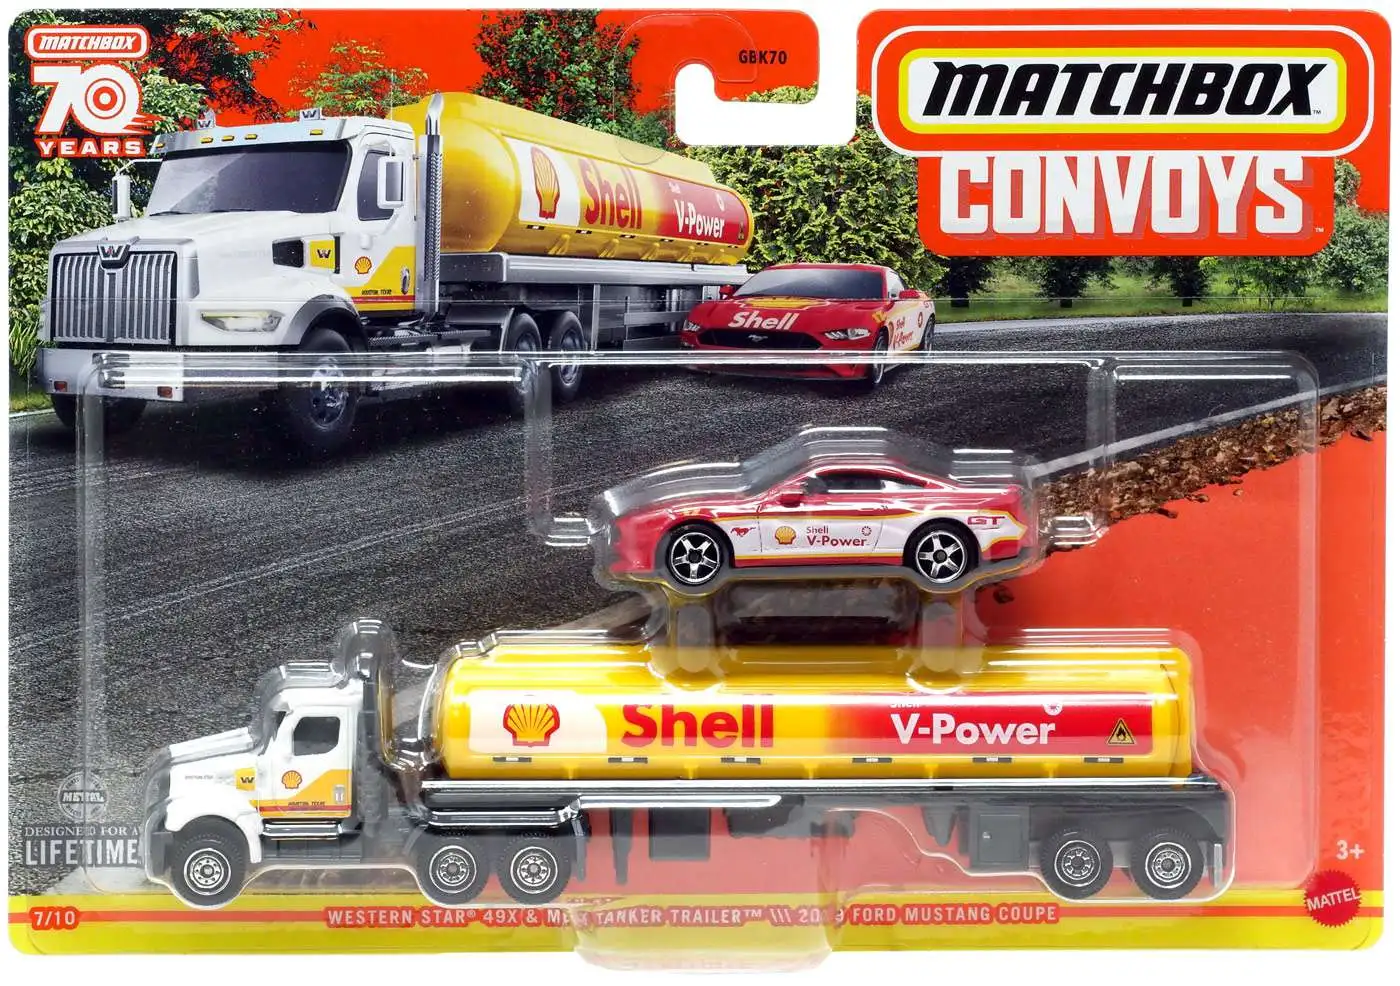 Matchbox 70 Years Convoys Western Star 49X MBX Tanker Trailer Ford 